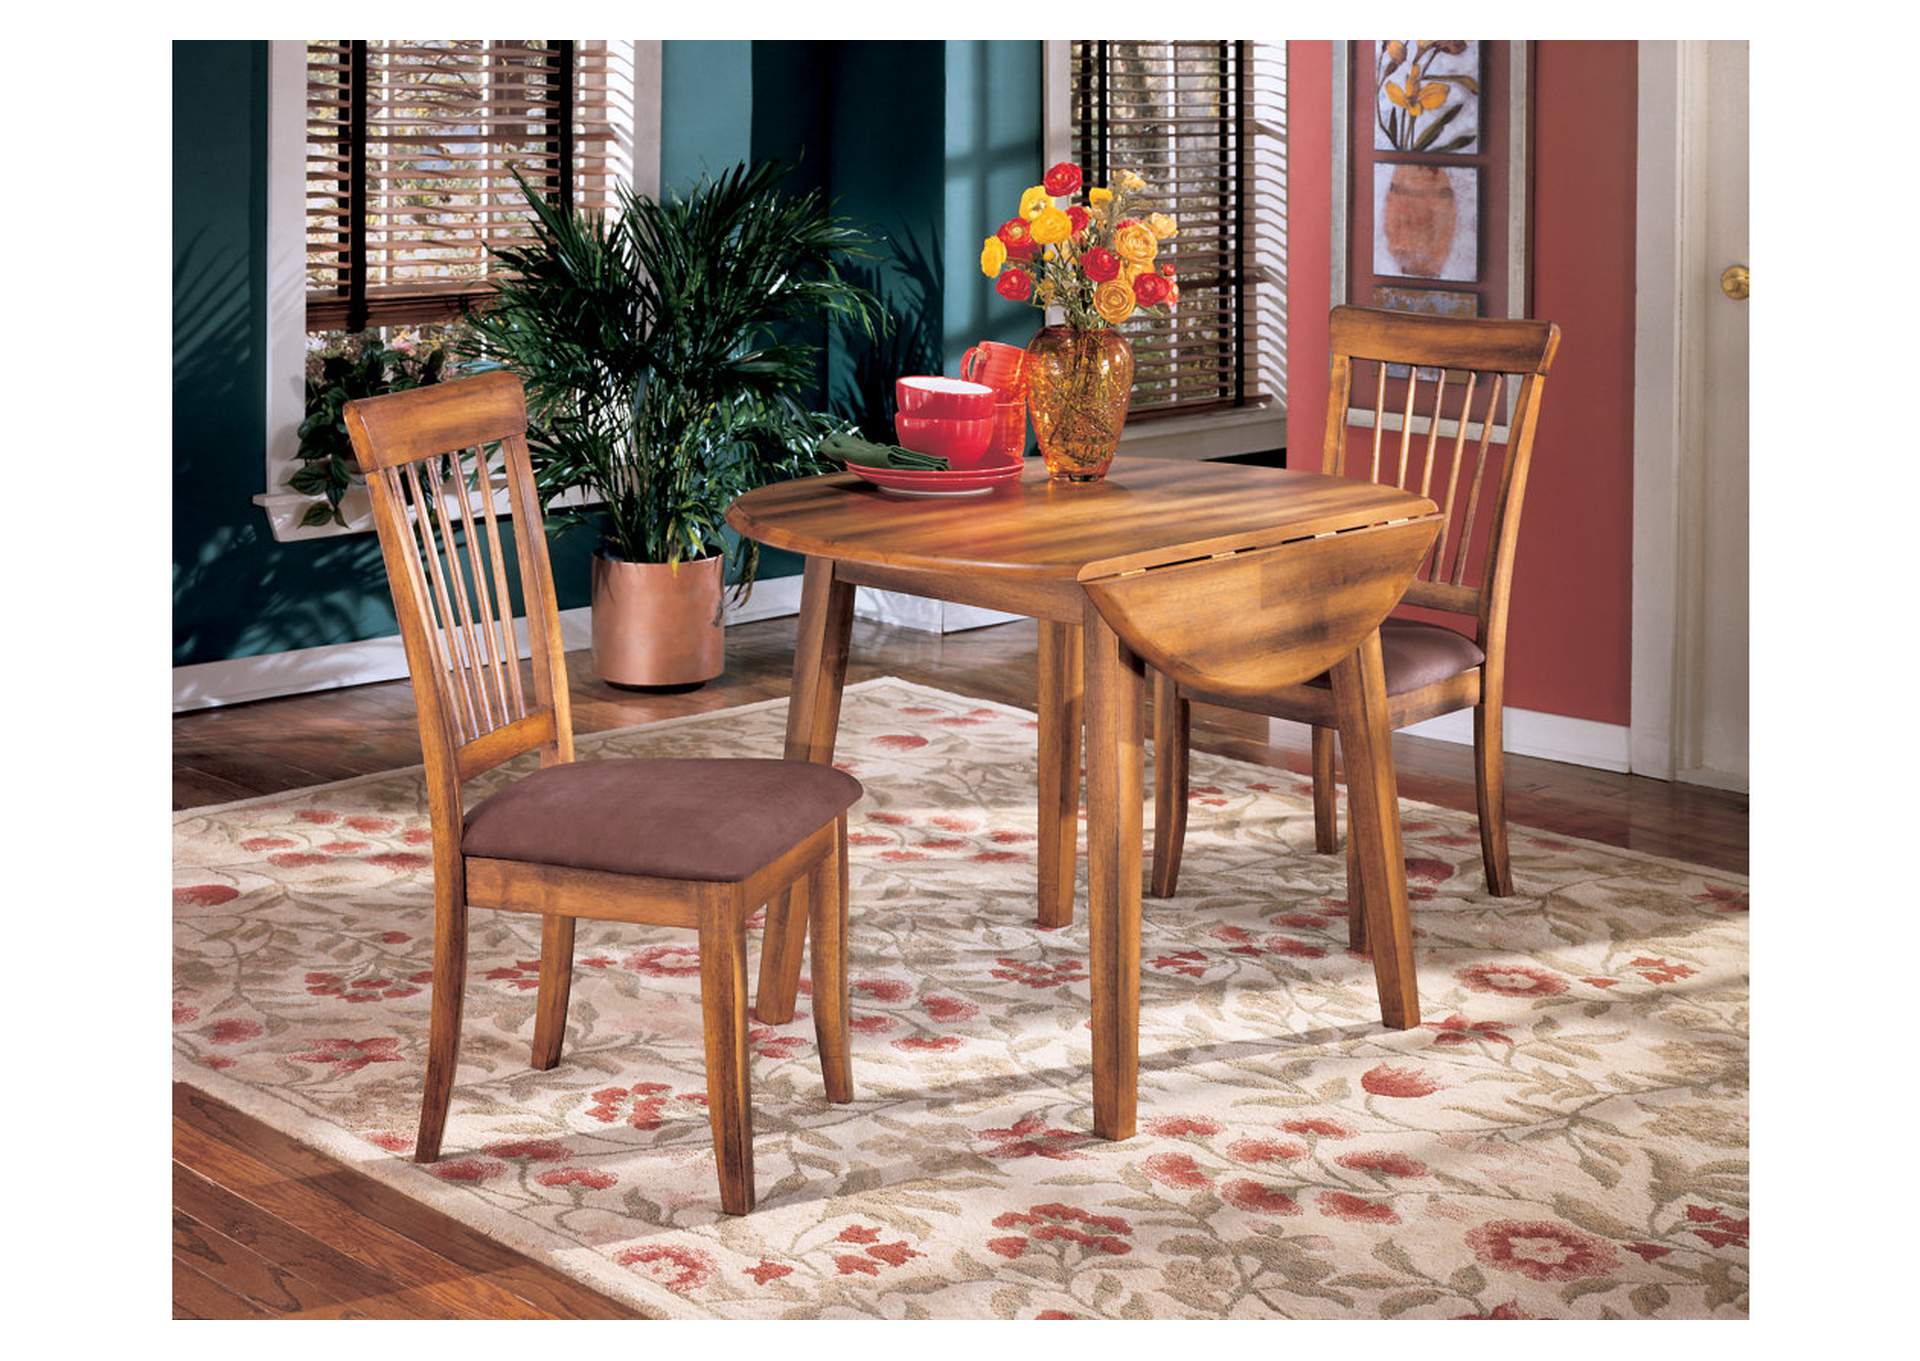 Berringer Dining Table and 2 Chairs,Ashley